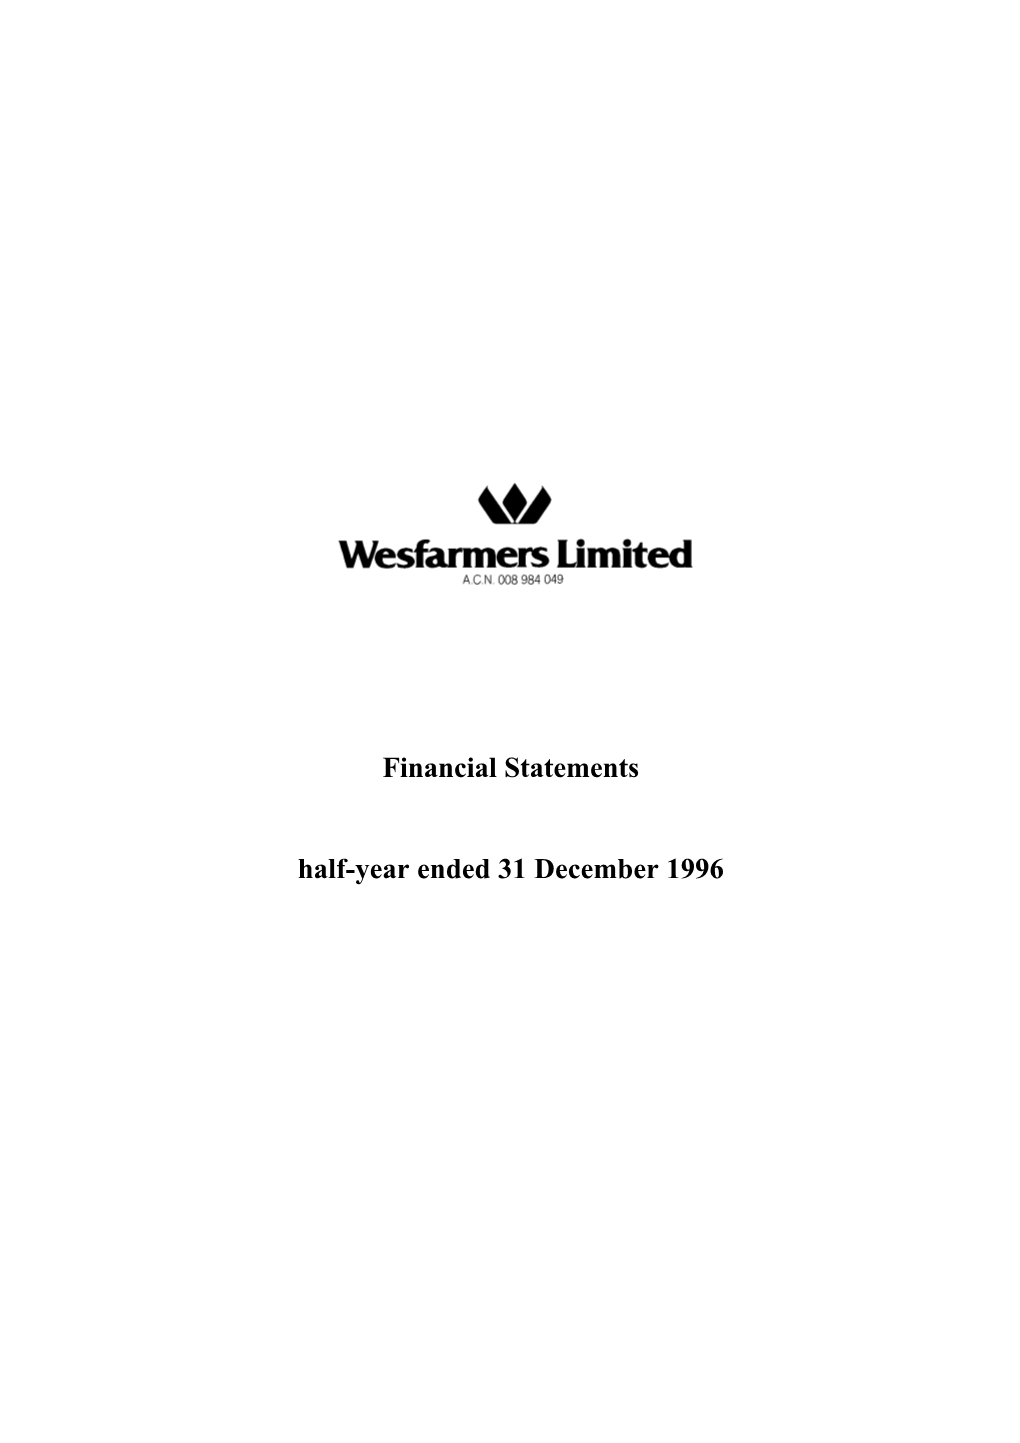 Lodgement of Financial Statements and Reports with The